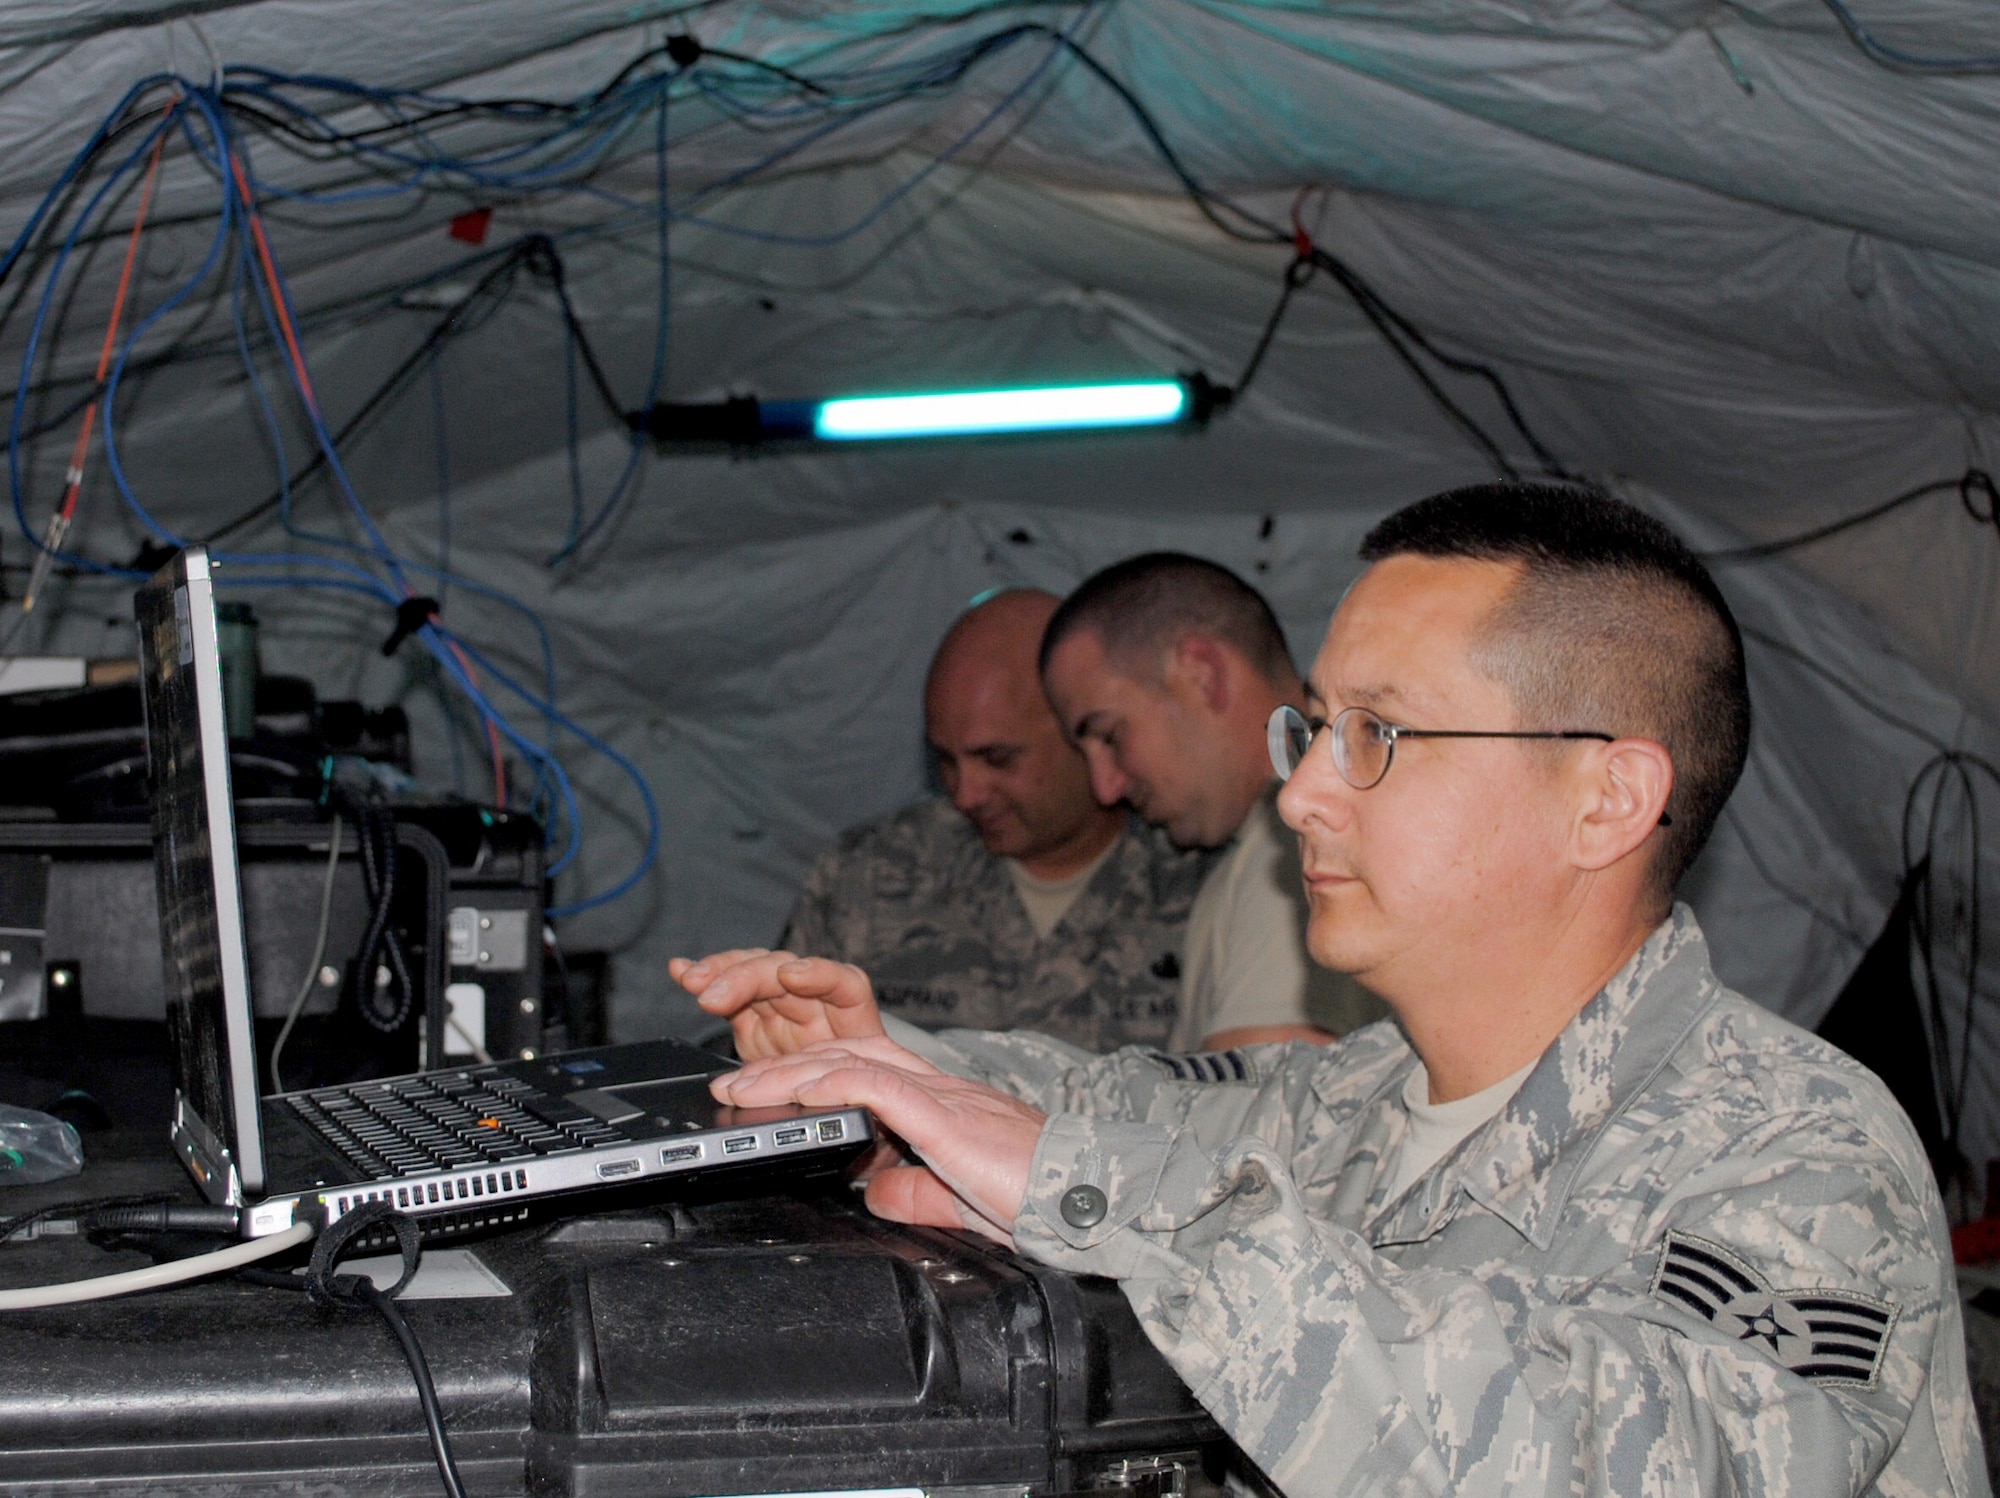 Staff Sgt. Johnny Linch, foreground, double checks settings for network routing while Master Sgt. Lou Bouffard and Staff Sgt. Michael Russano, all of the 55th Combat Communications Squadron, Robins Air Force Base, Ga., configure settings on network servers in support of African Lion 2013 in Morocco on April 9. African Lion is an annually scheduled, bilateral U.S. and Moroccan sponsored exercise designed to improve interoperability and mutual understanding of each nation's tactics, techniques and procedures. This year, the 55th CBCS was selected to provide communications support for the exercise. (U.S. Air Force photo/SrA. Will Toussaint)